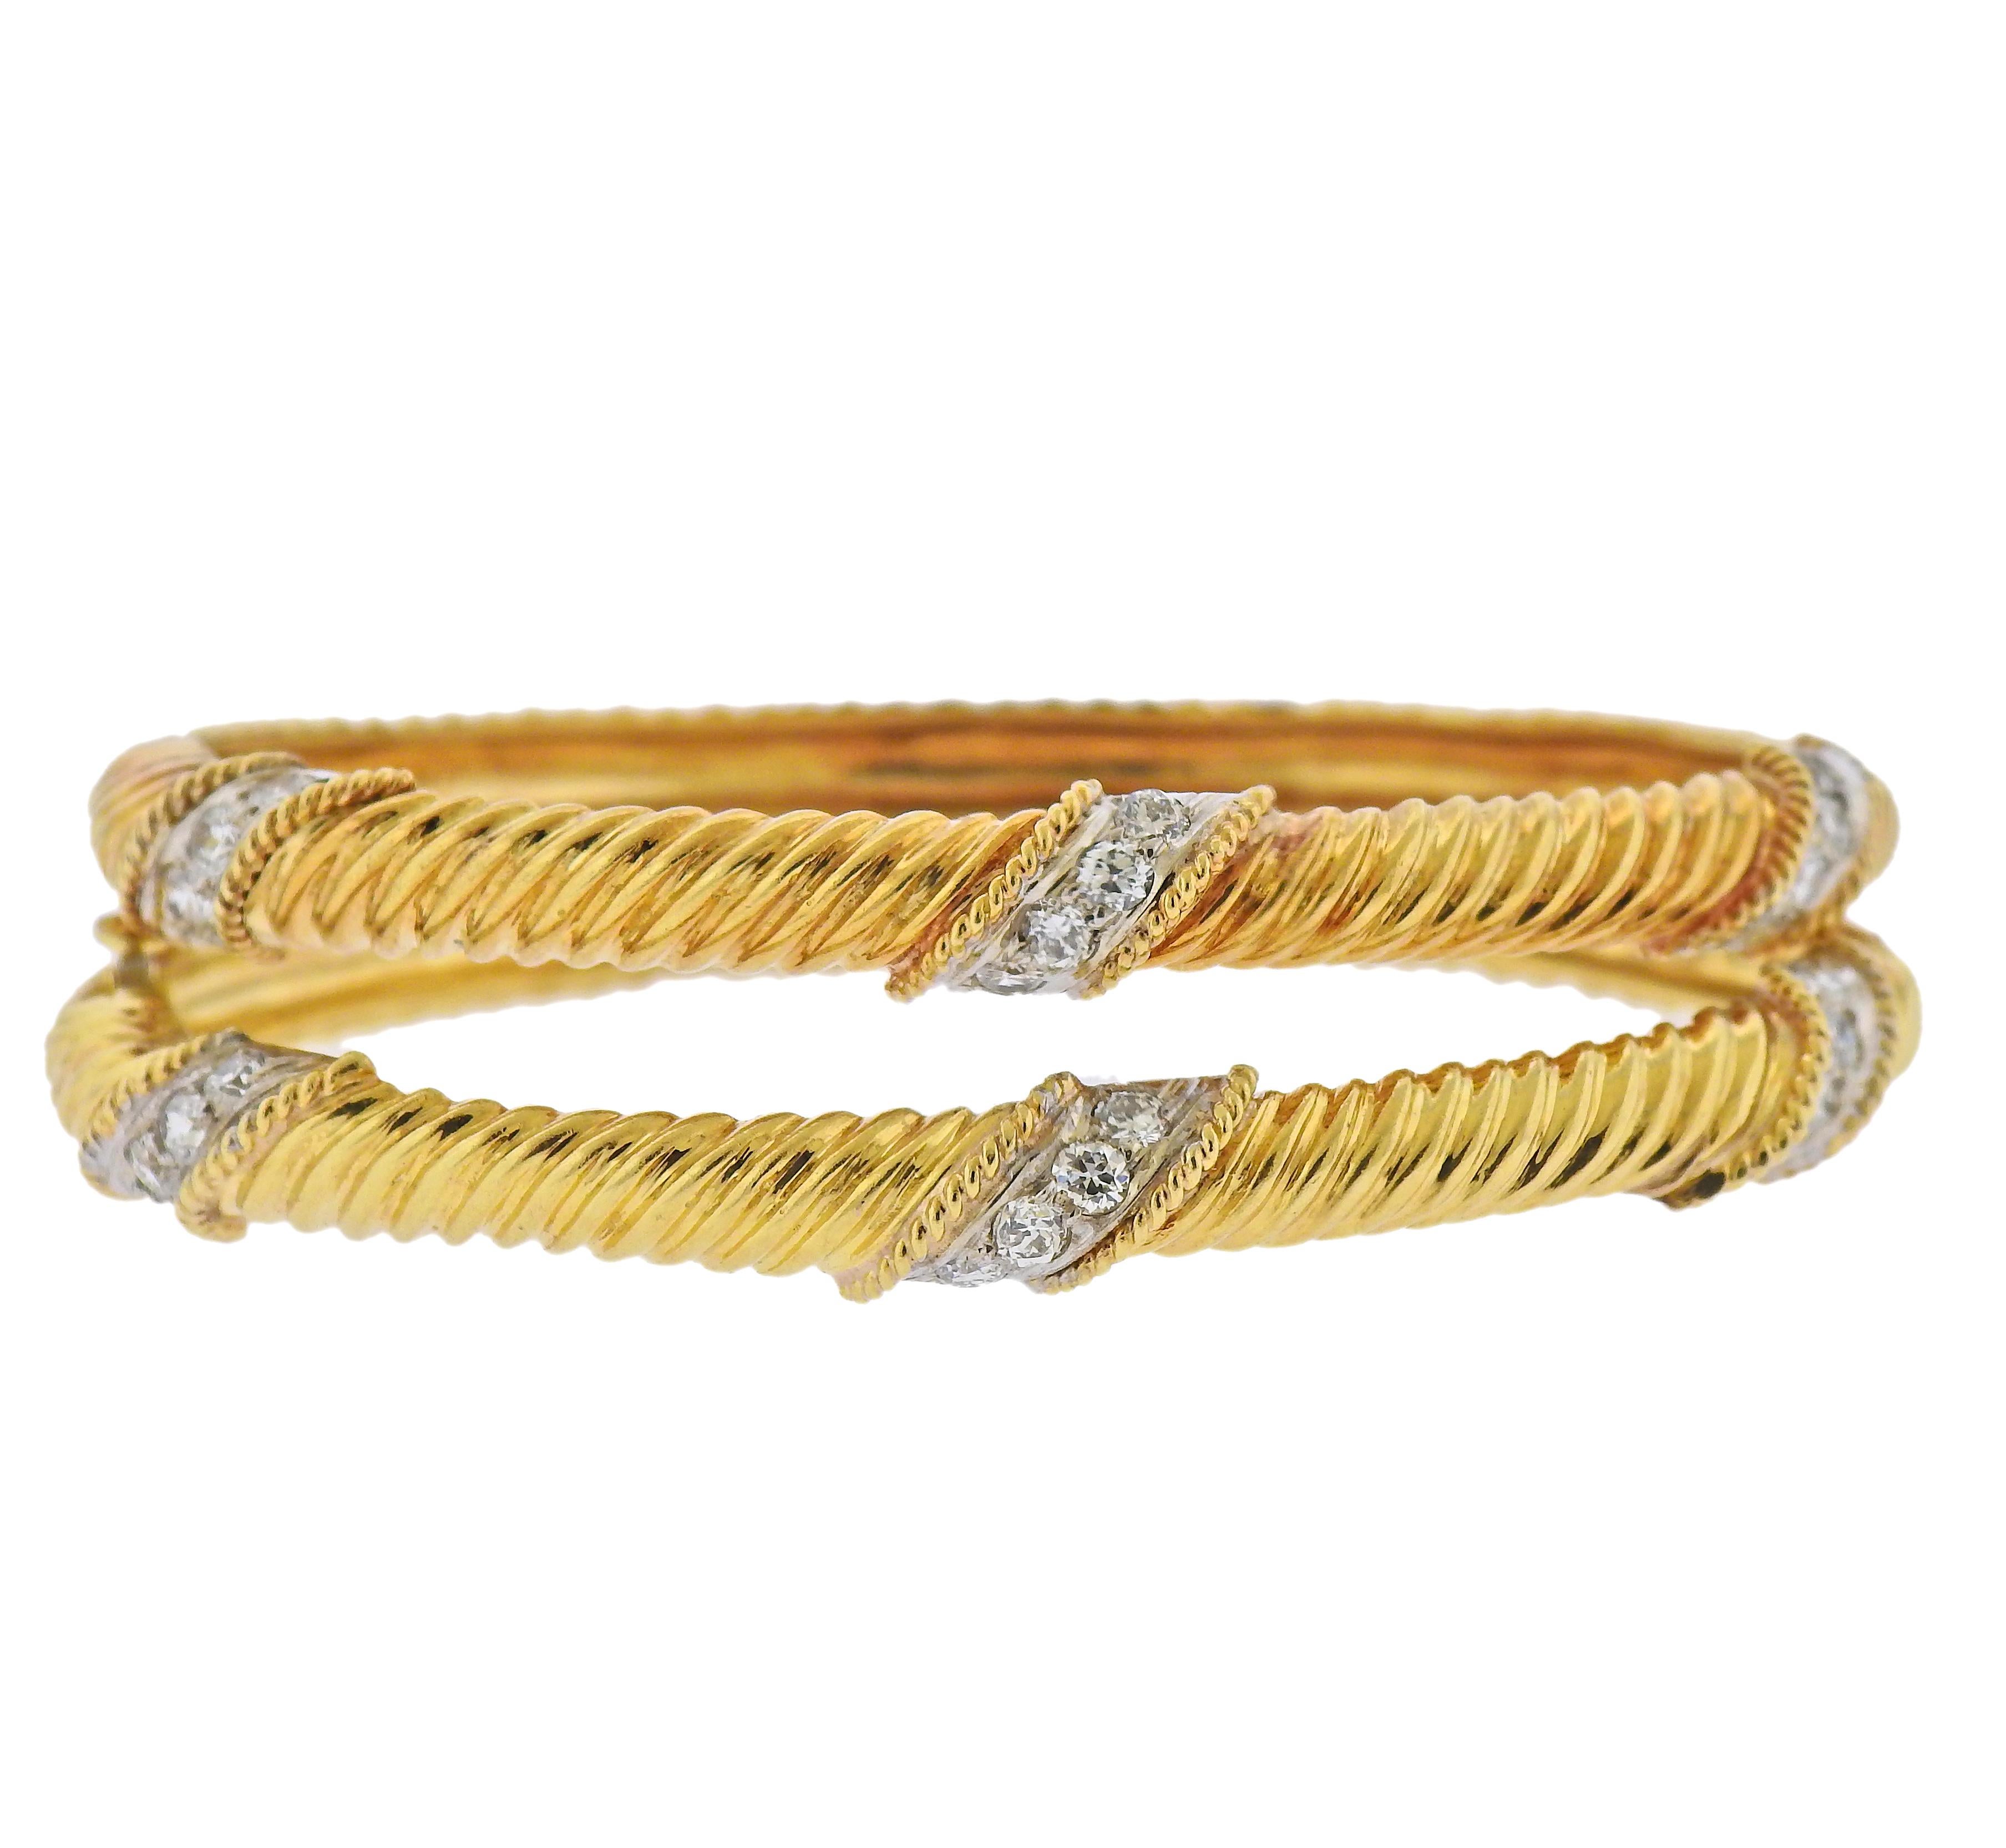 Set of two 14k gold vintage bracelets with a total of approx. 1.50ctw in diamonds. Bracelets will fit approx. 6.75